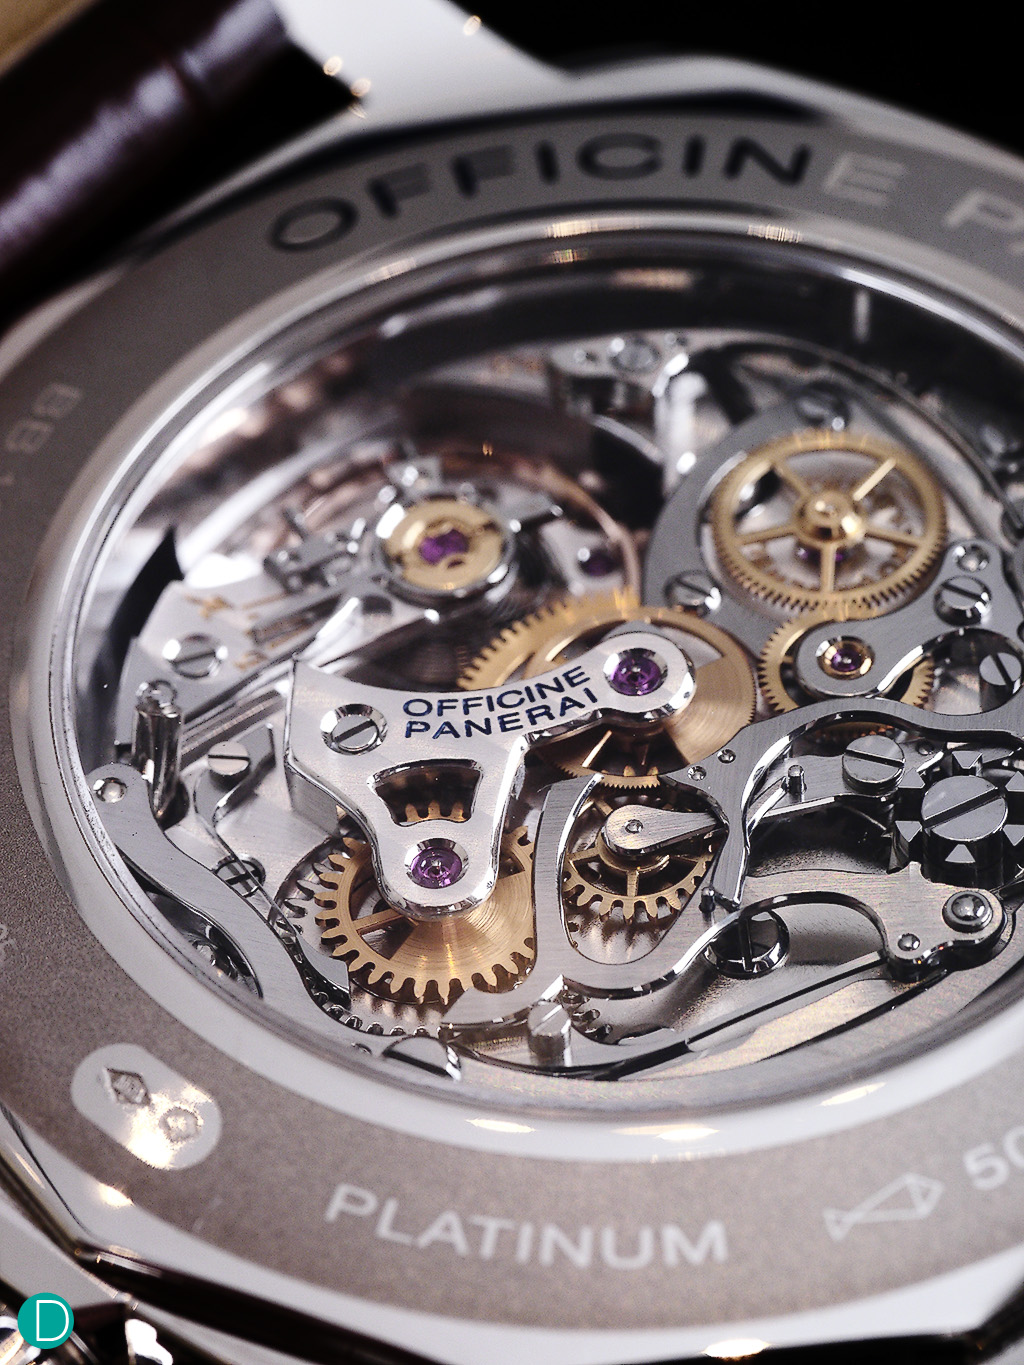 The heart of the 1940 Chronographs- the Calibre OP XXV (based on the Minerva Calibre 13-22).